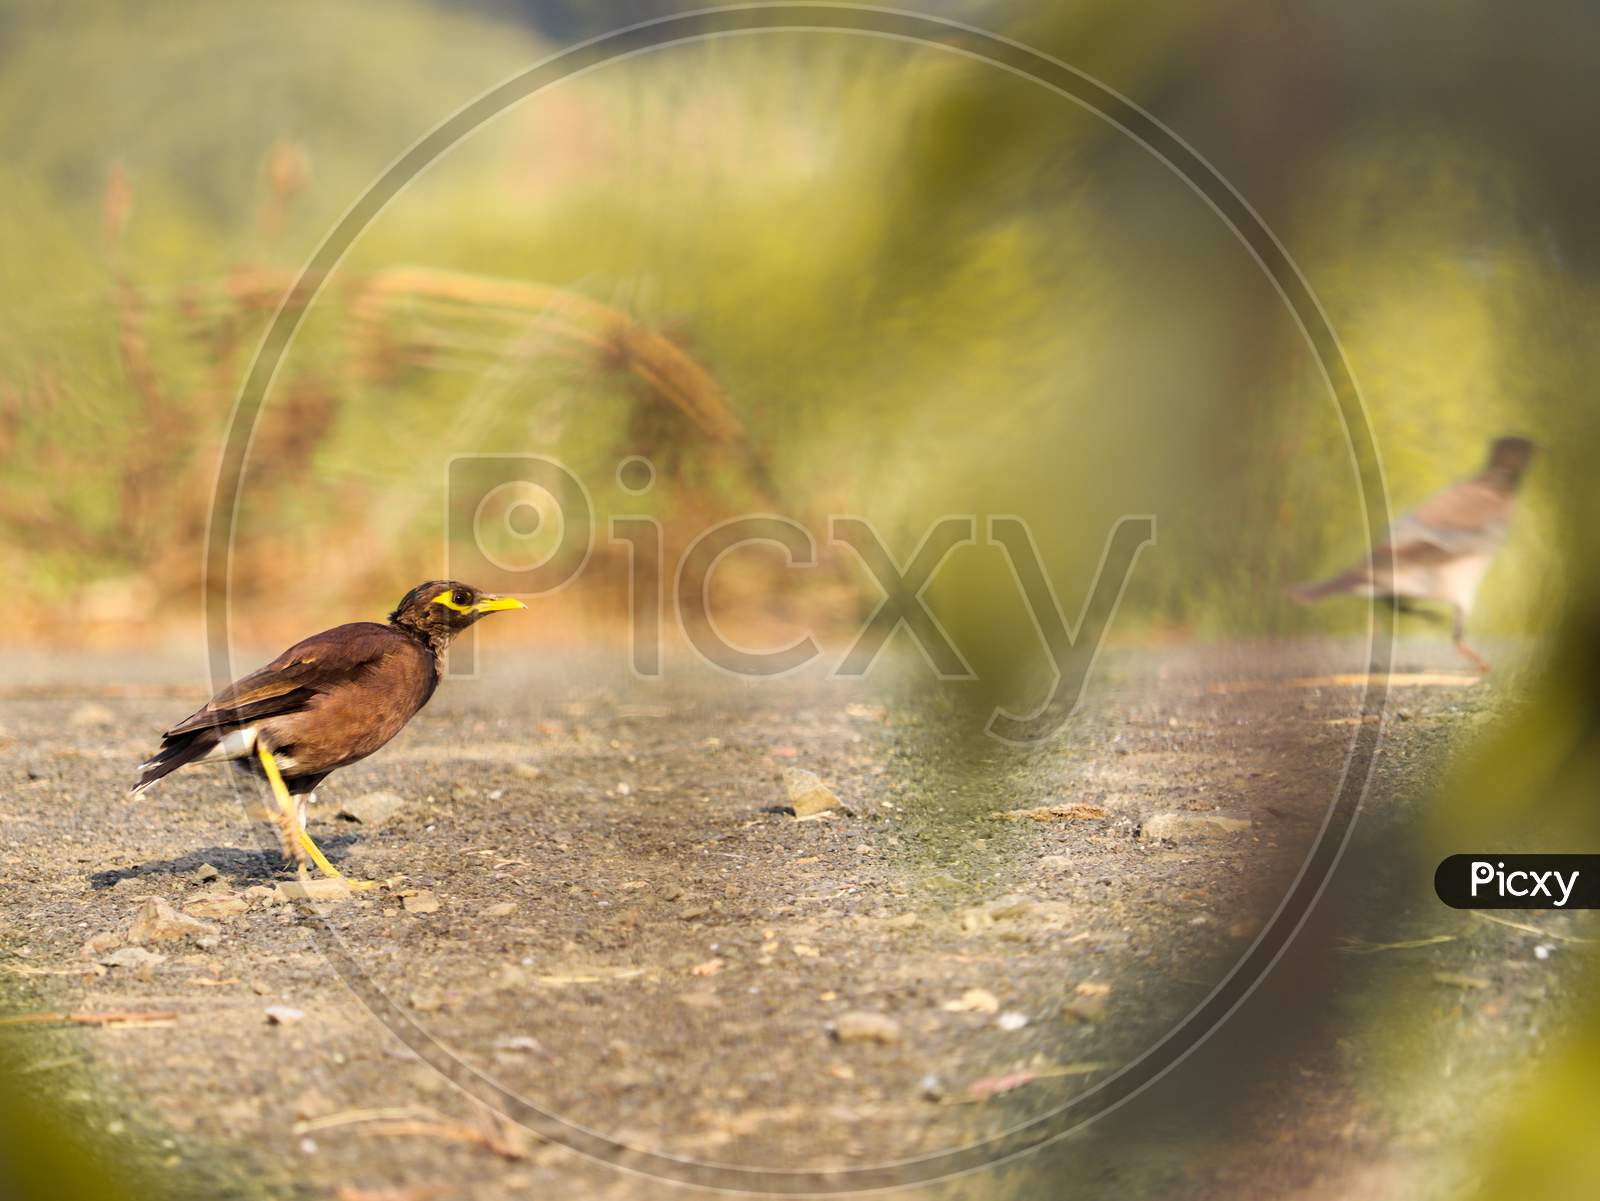 A Common Myna Hiding Behind The Wild Grass In India Forest With The Nice Bokeh And Focus Only On Myna Eyes.